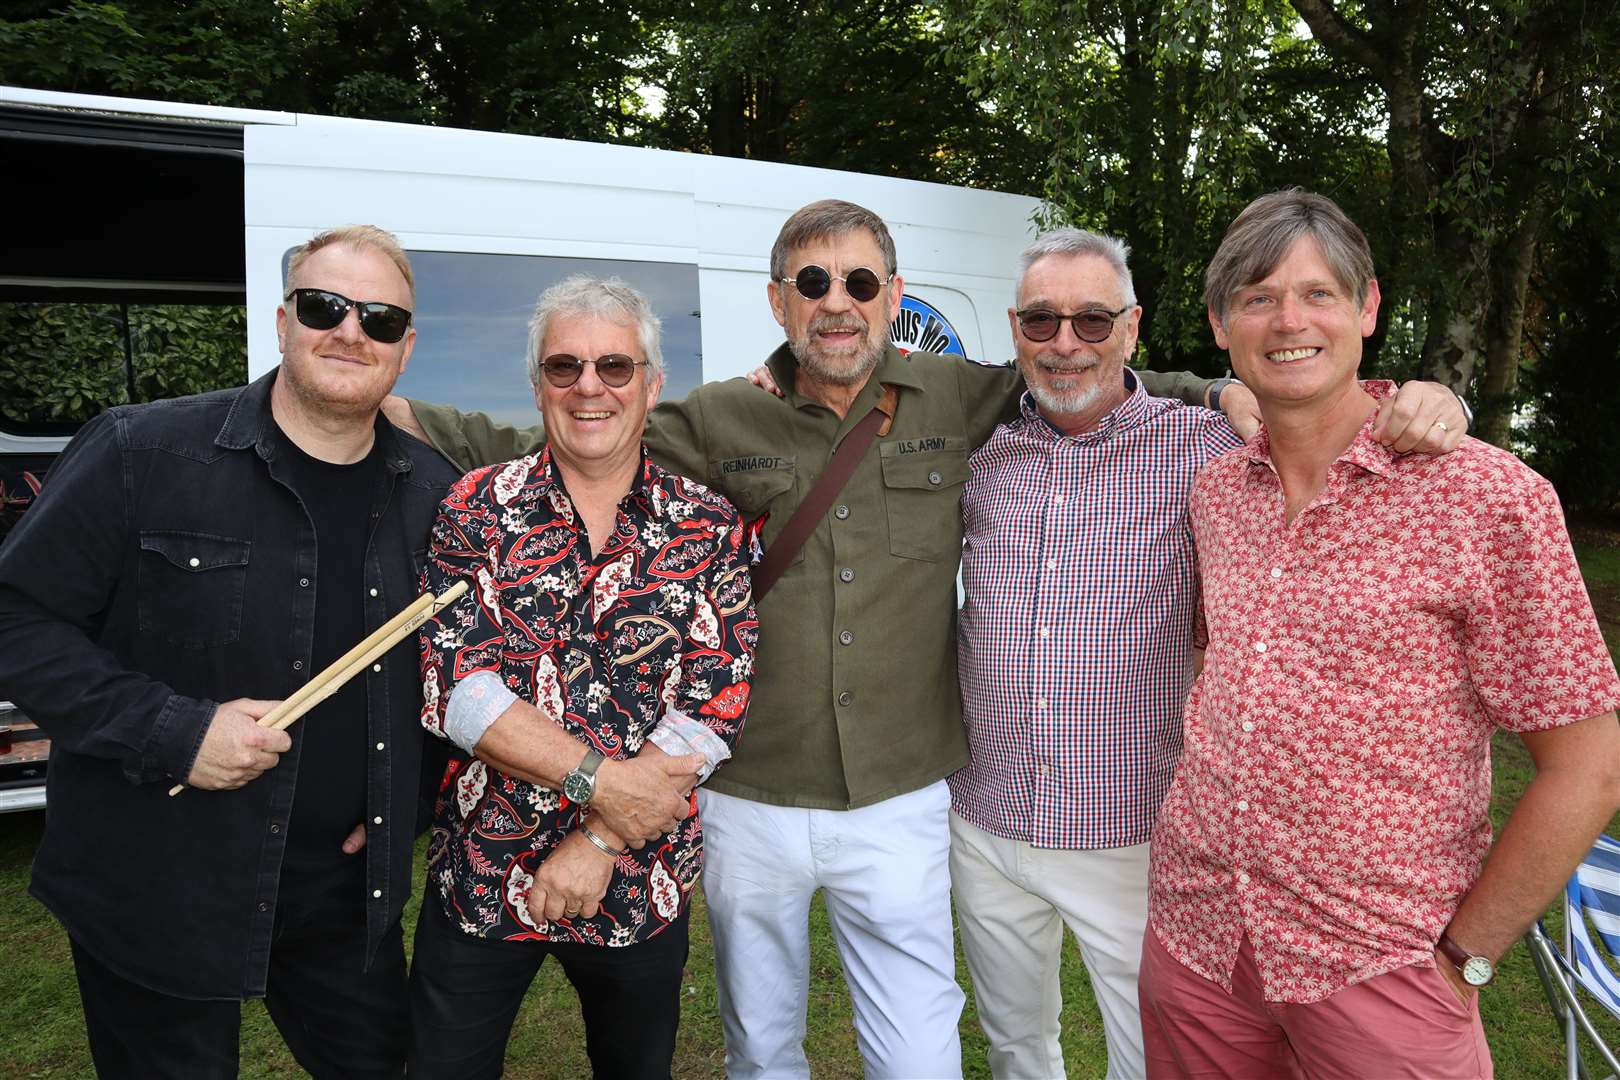 Marvellous Mo (Maurice Dunk, centre) and the Backline Ferrets at Groovy Fest 3 at the Woodstock